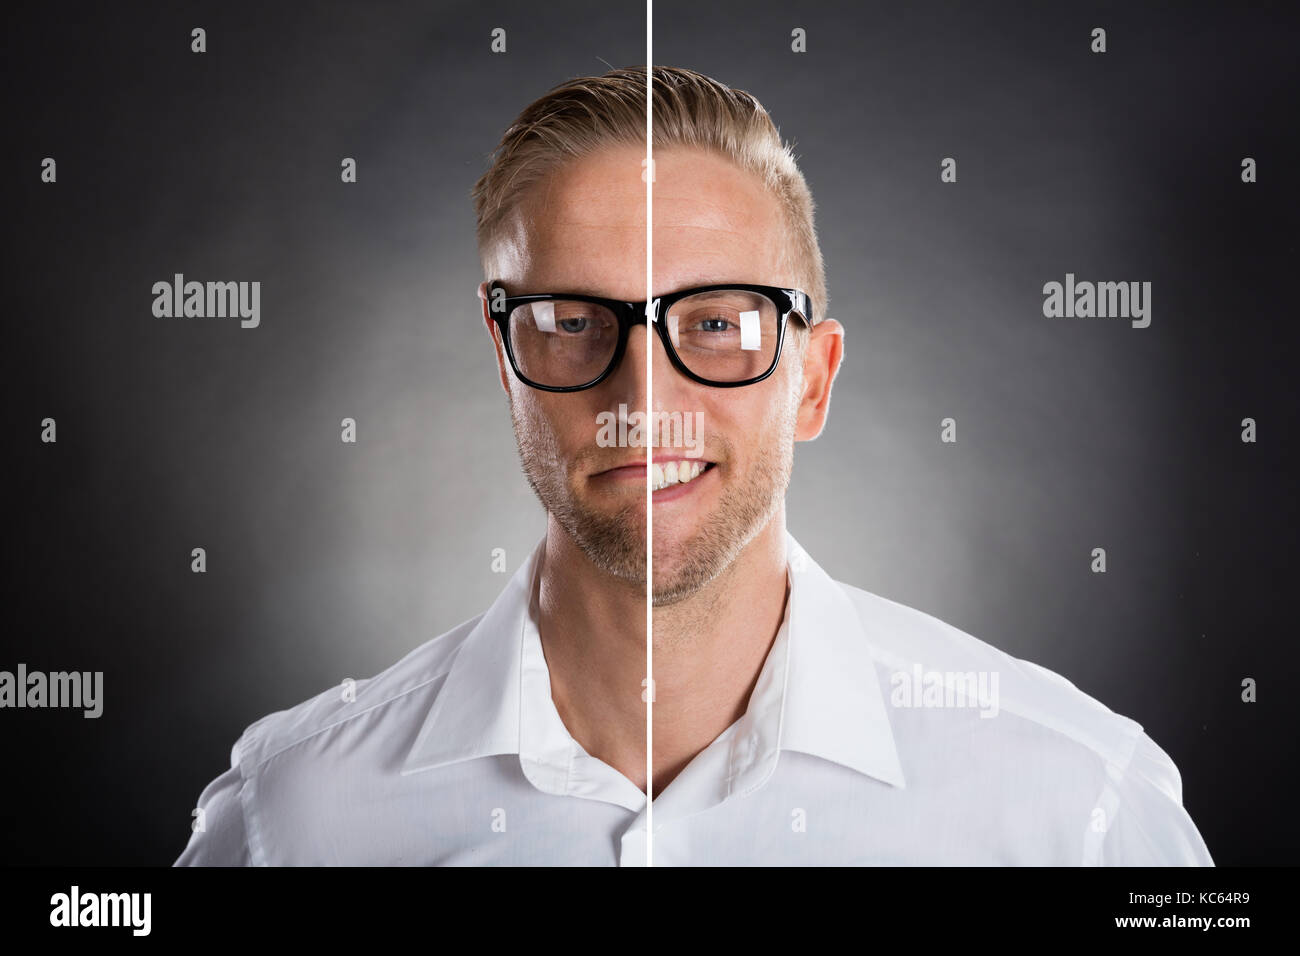 Man's Face Showing Happy And Sad Emotions Against Grey Background Stock Photo